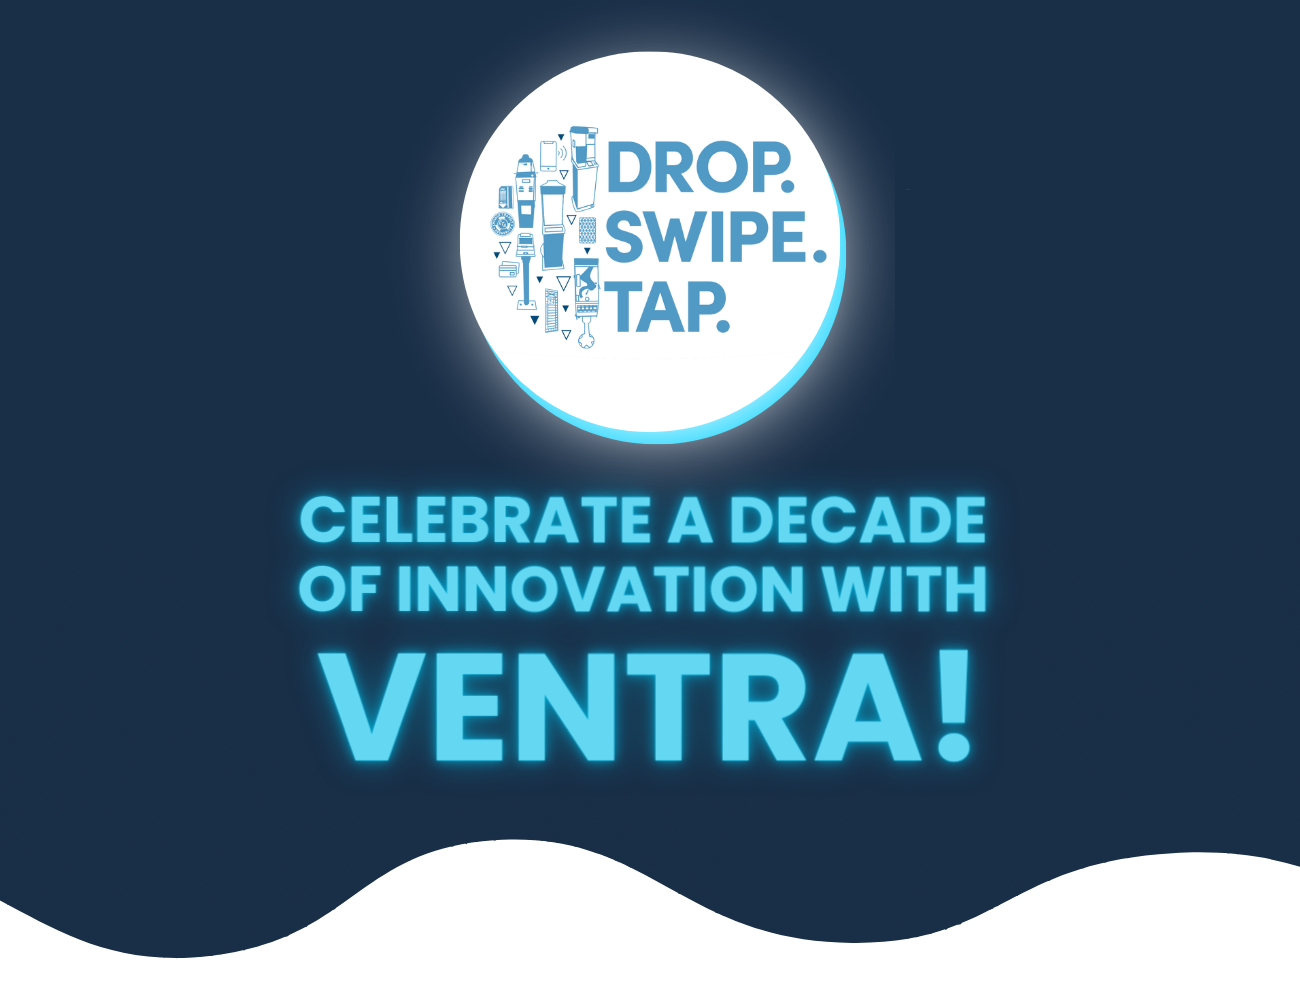 Celebrate a decade of immovation with Ventra!